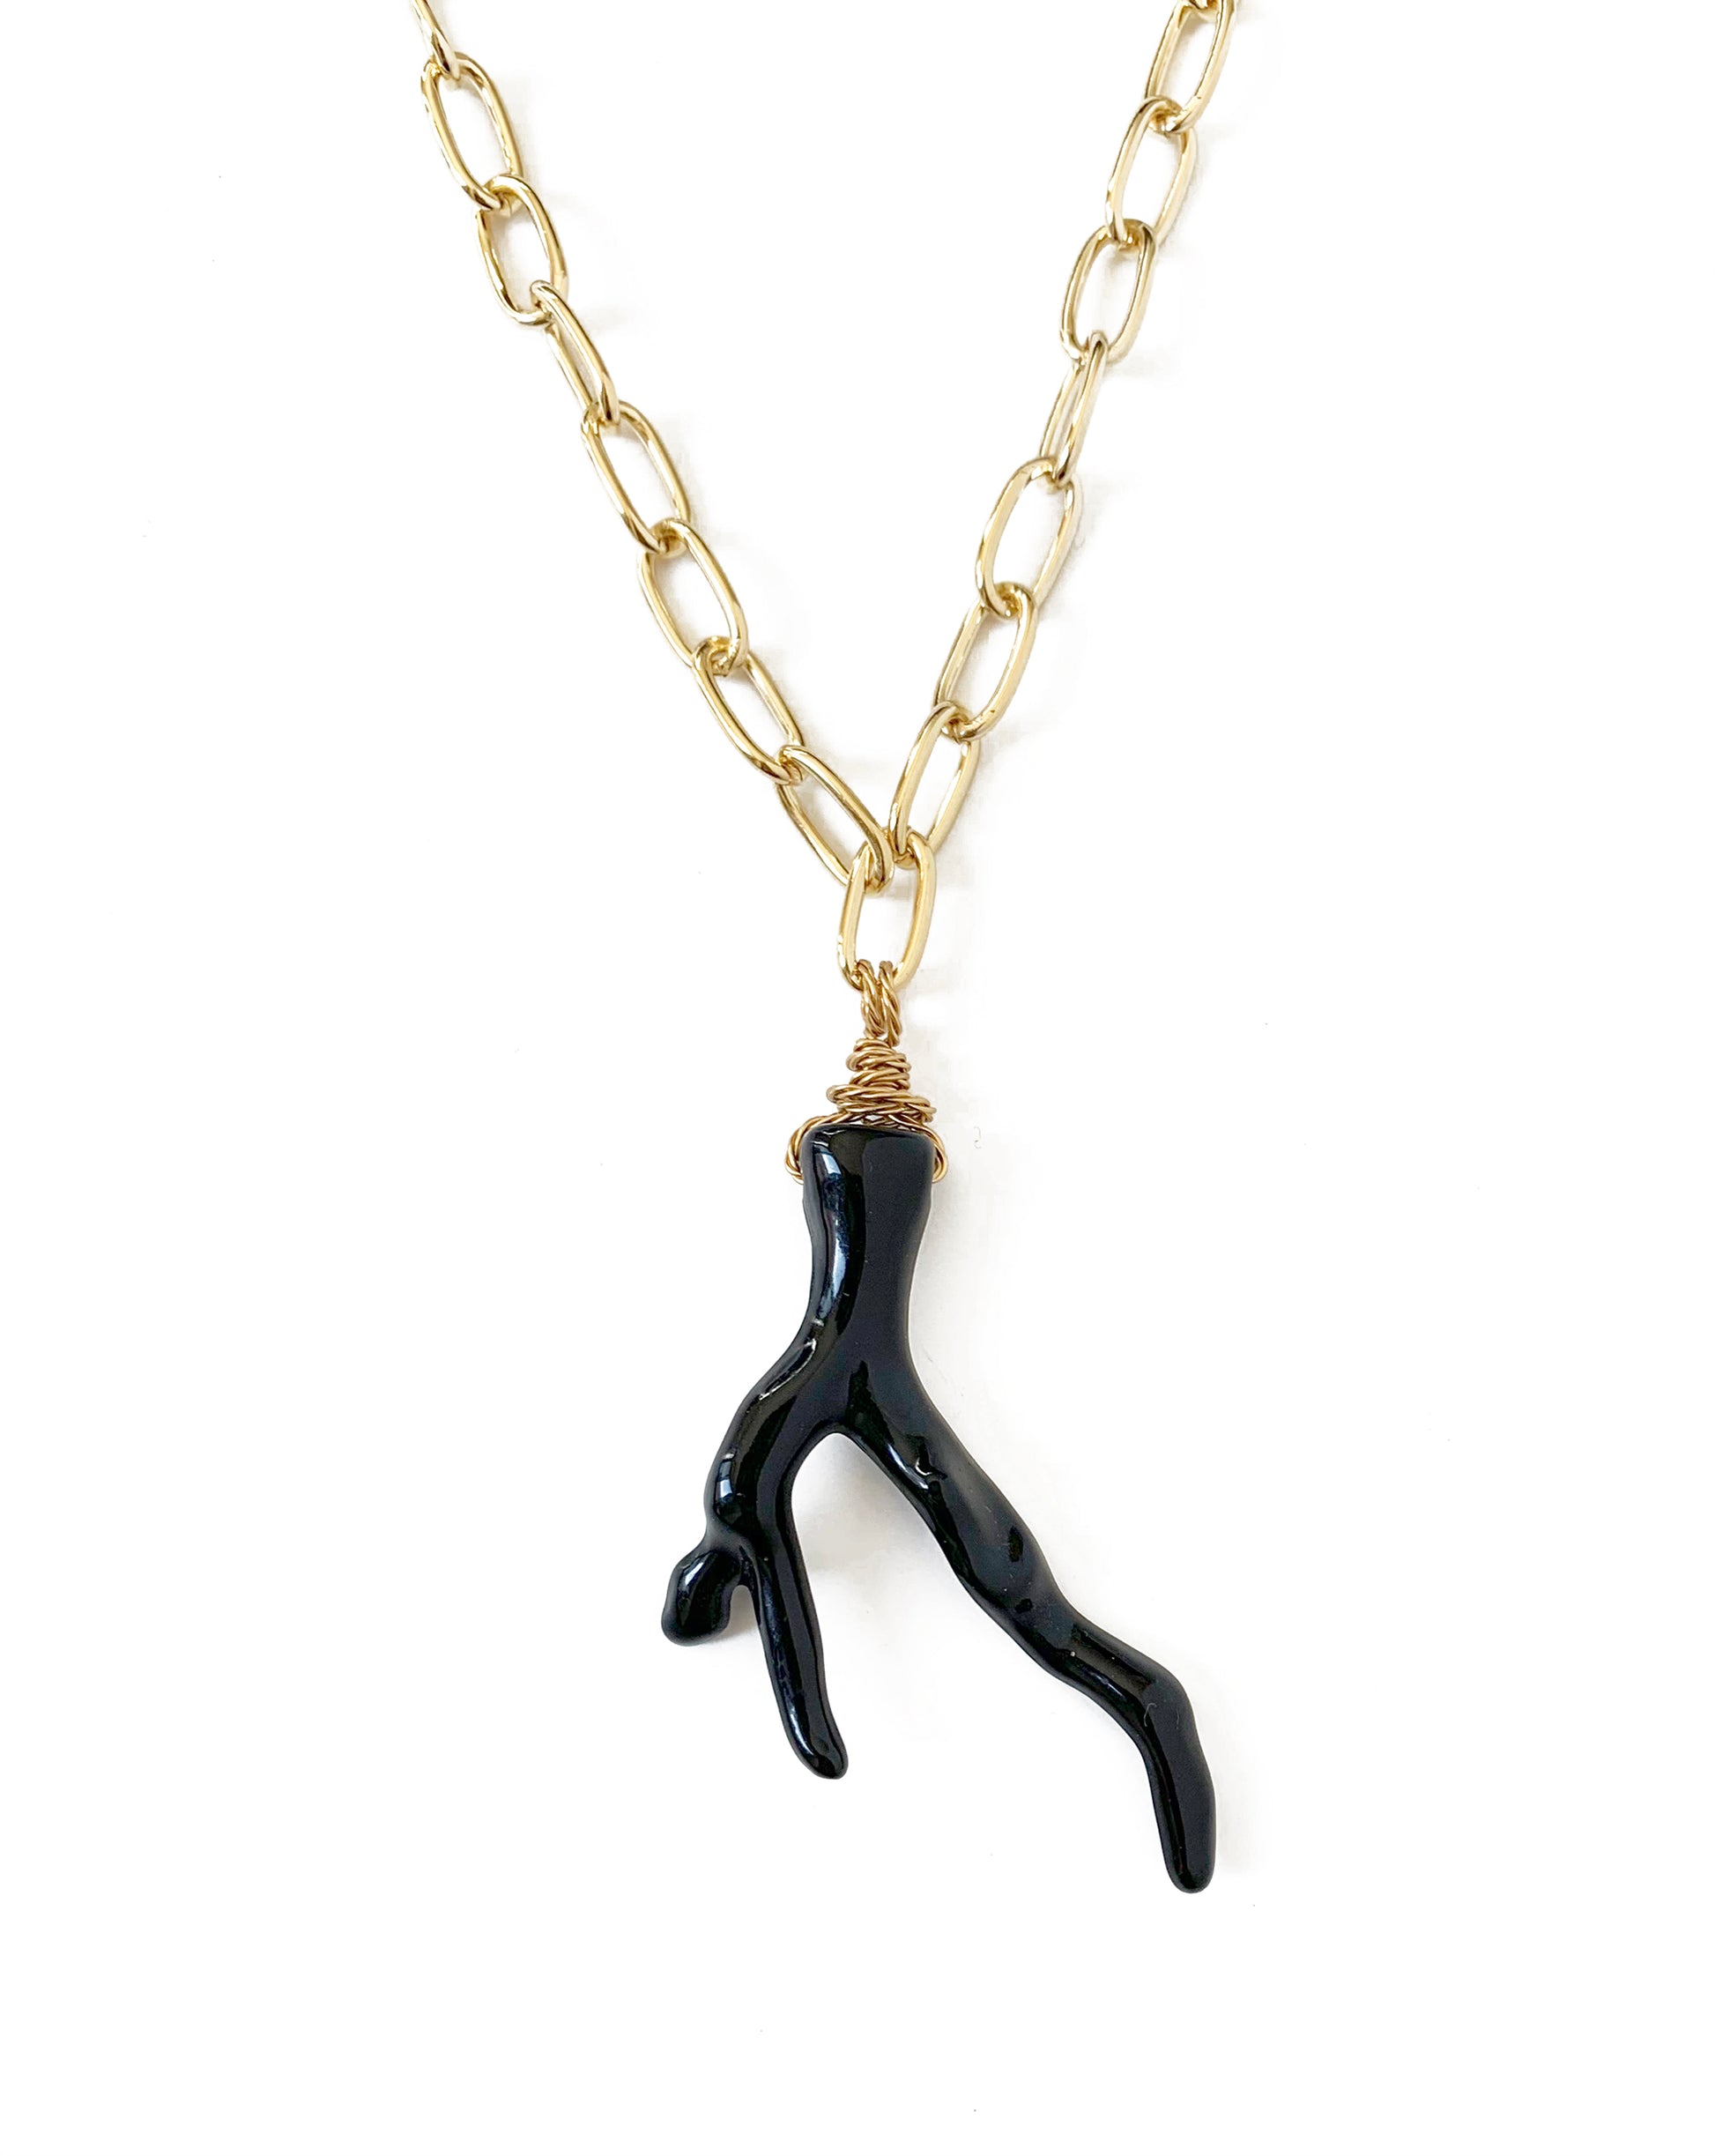 Black Coral Necklace, Resin Coral Branch Amulet Charm Pendant – Multi Chic